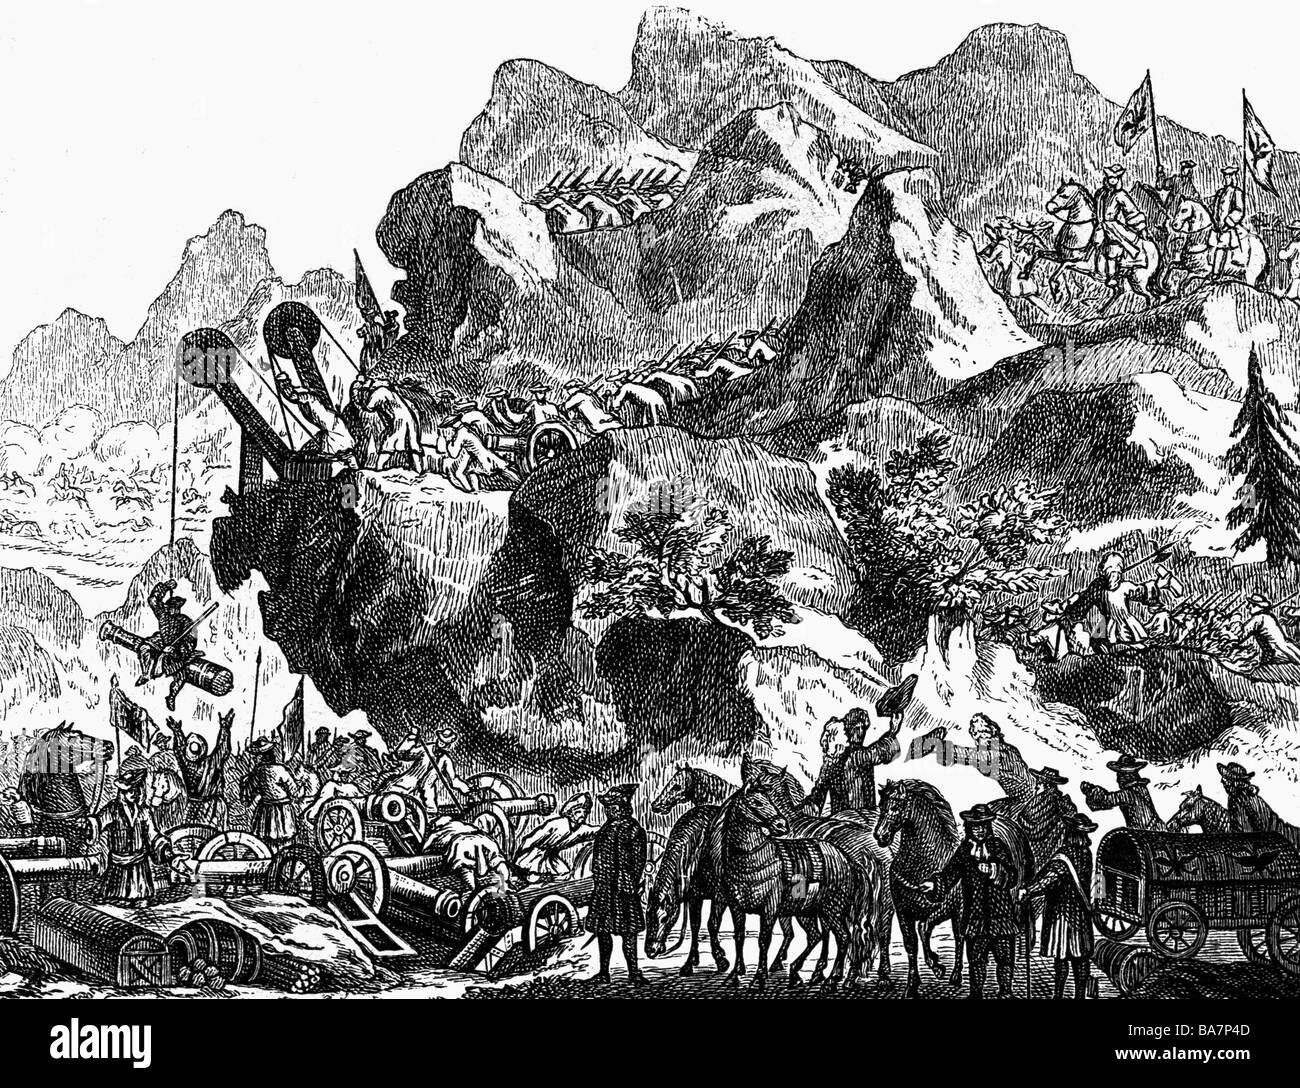 events, War of the Spanish Succession 1701 - 1714, the Imperial army commanded by Prince Eugene of Savoy is crossing the Trentinian Alps into Italy, 1701, copper engraving, 'Theatrum Europaeum', volume 16, publiched by Matthaeus Merian descendants, Frankfurt am Main, 1708, , Artist's Copyright has not to be cleared Stock Photo